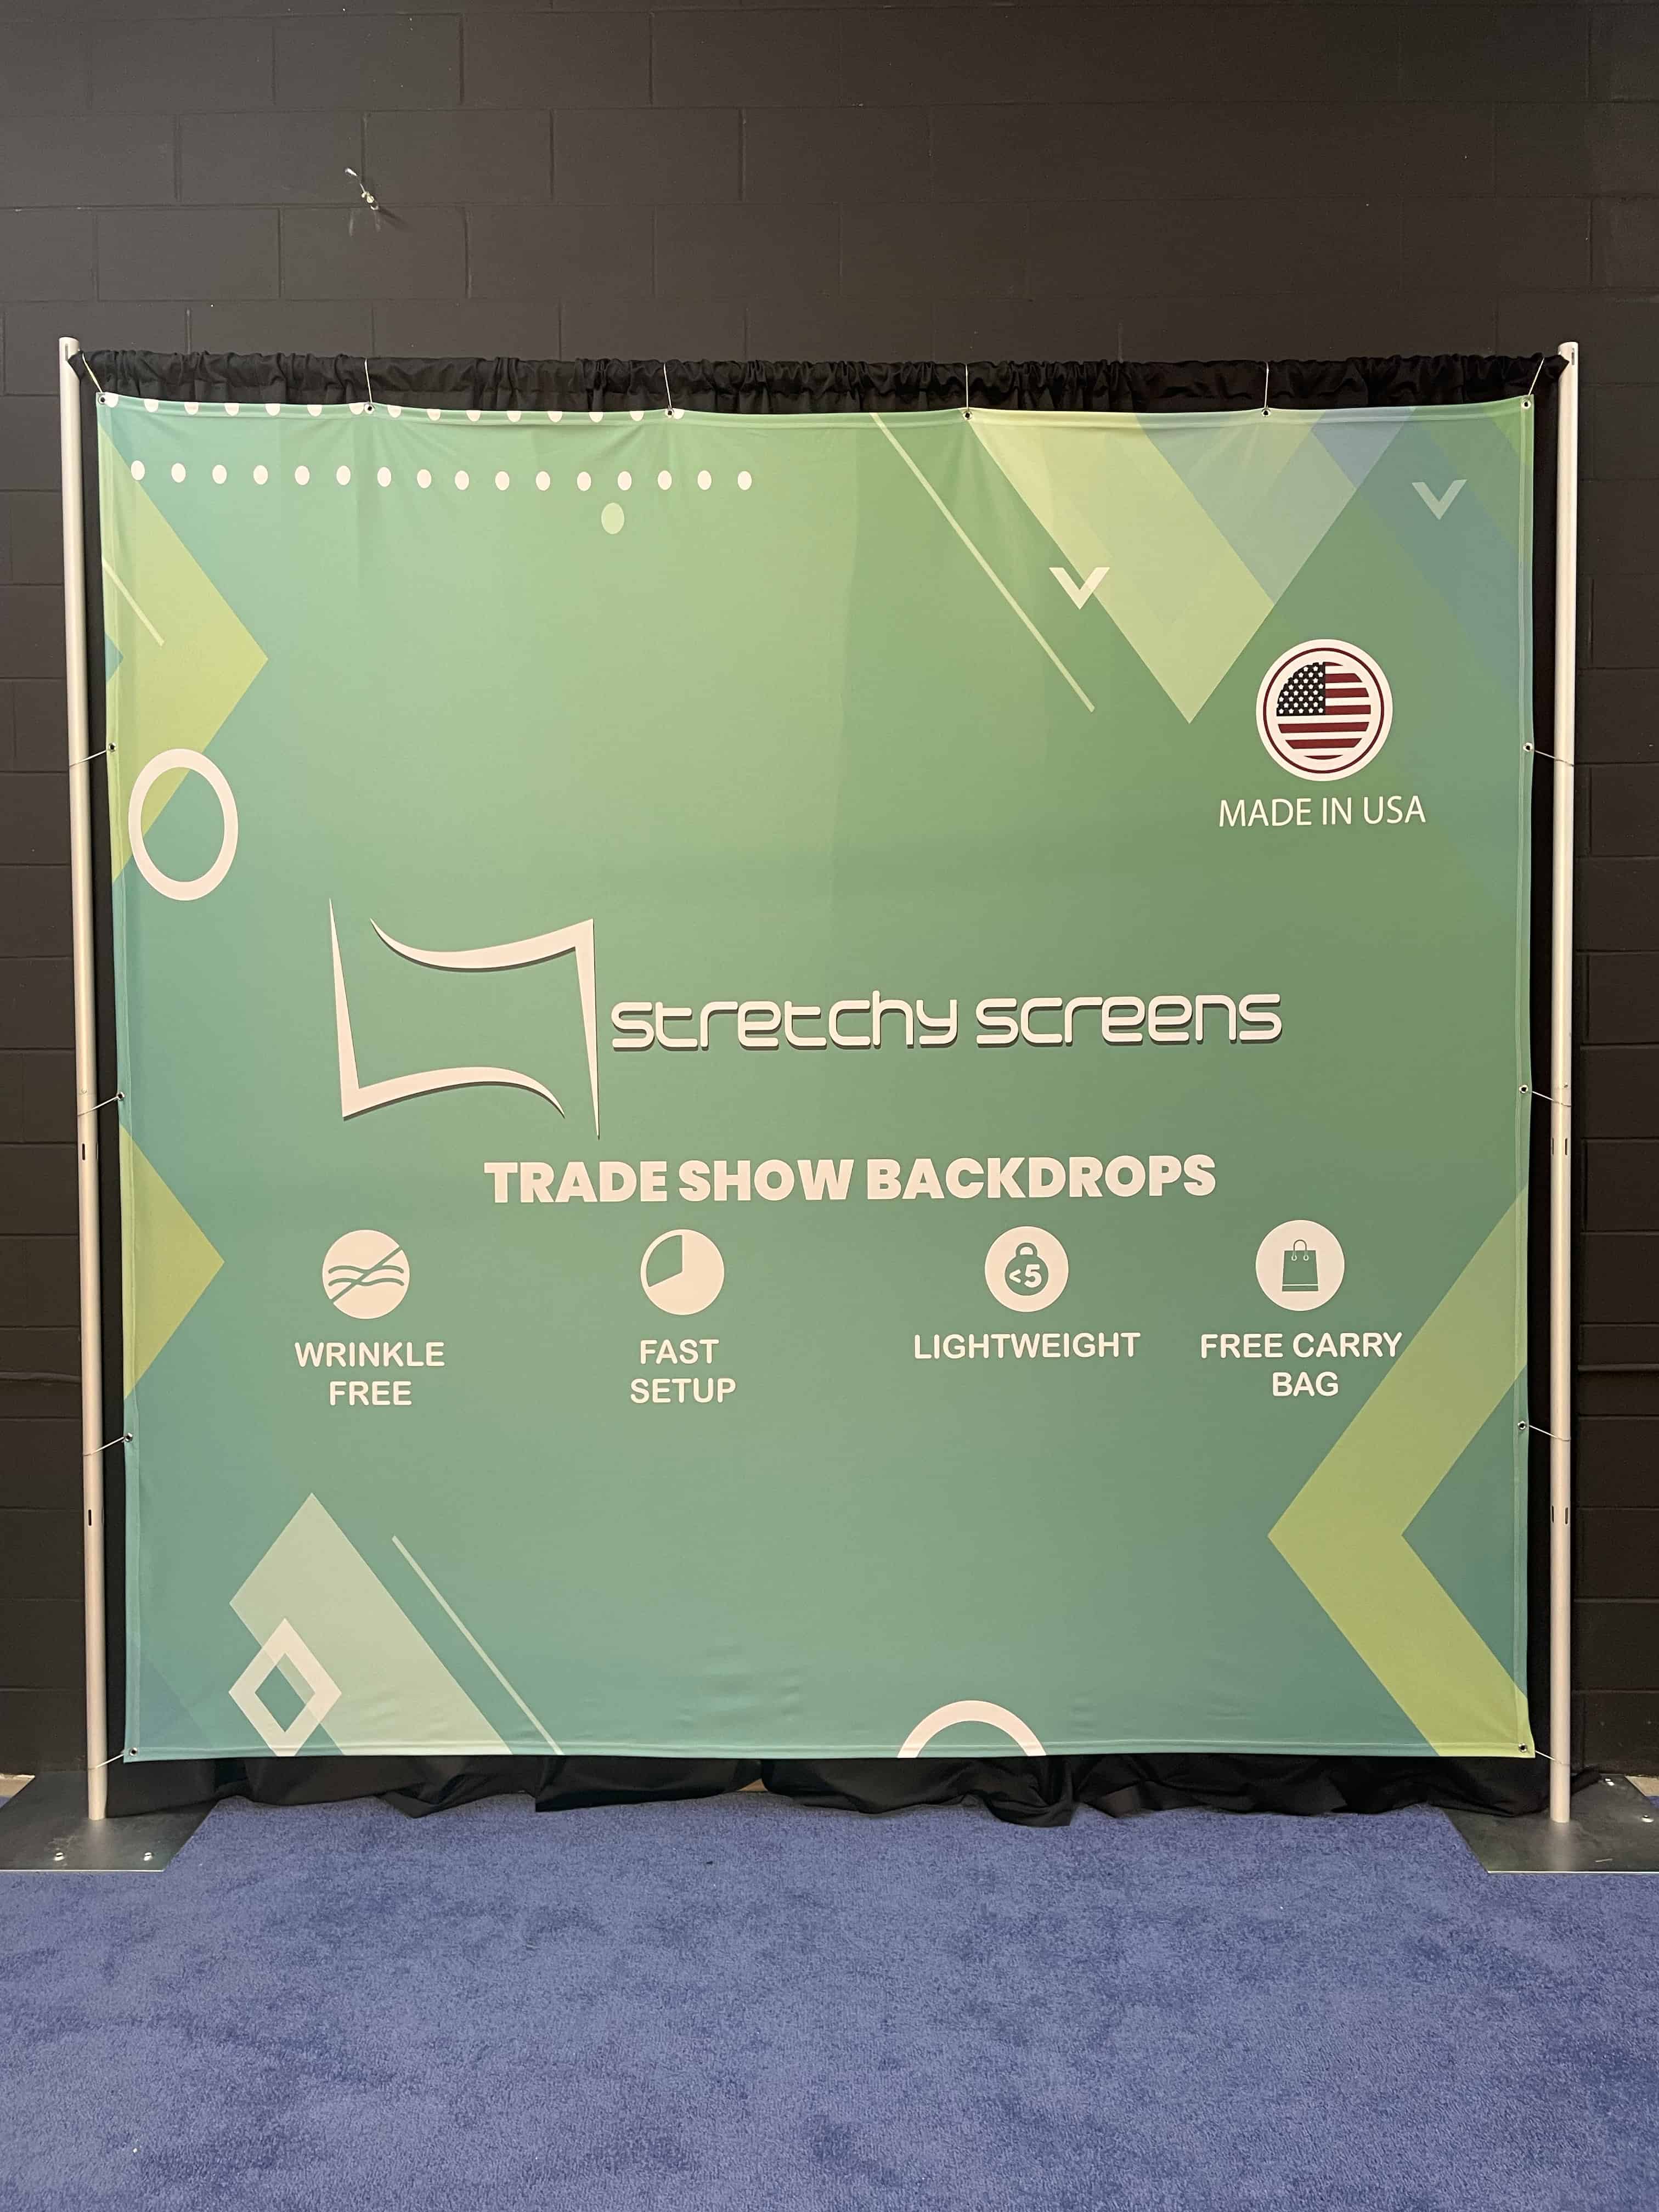 10 Ft Easy Trade Show Backdrop Package - StretchyScreens